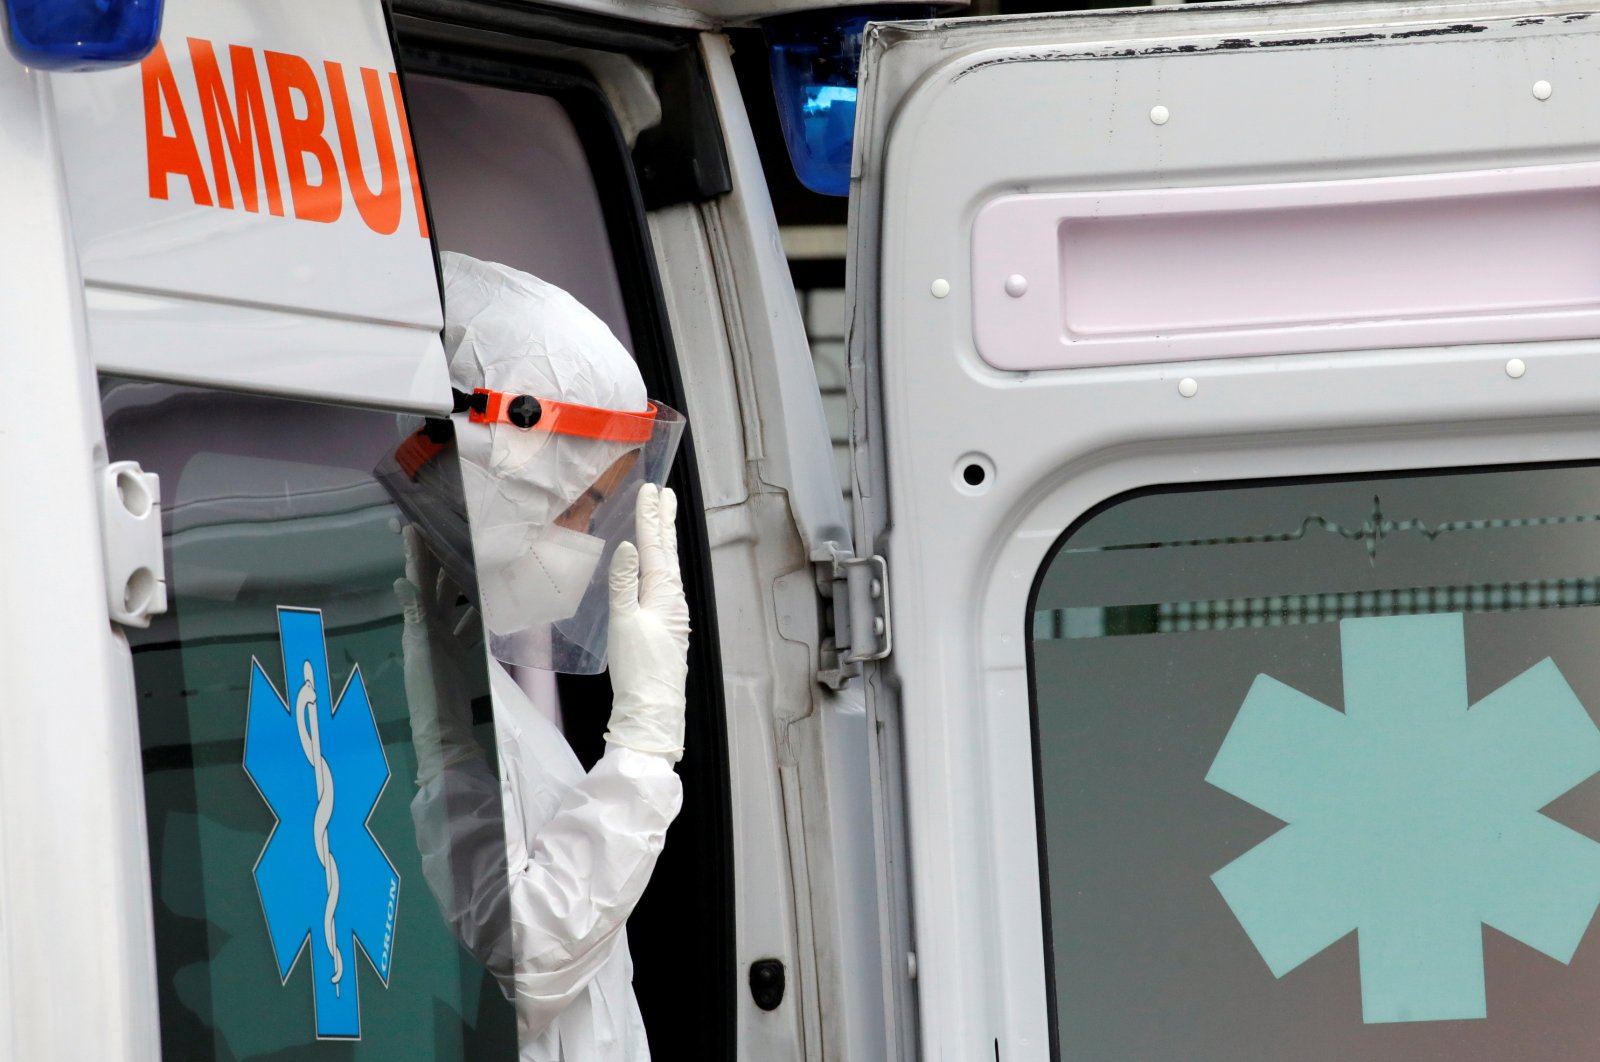 A medical worker is seen in an ambulance at the entrance of the Cardarelli hospital, amid the outbreak of COVID-19 in Naples, Italy, Nov. 12, 2020. (Reuters Photo)